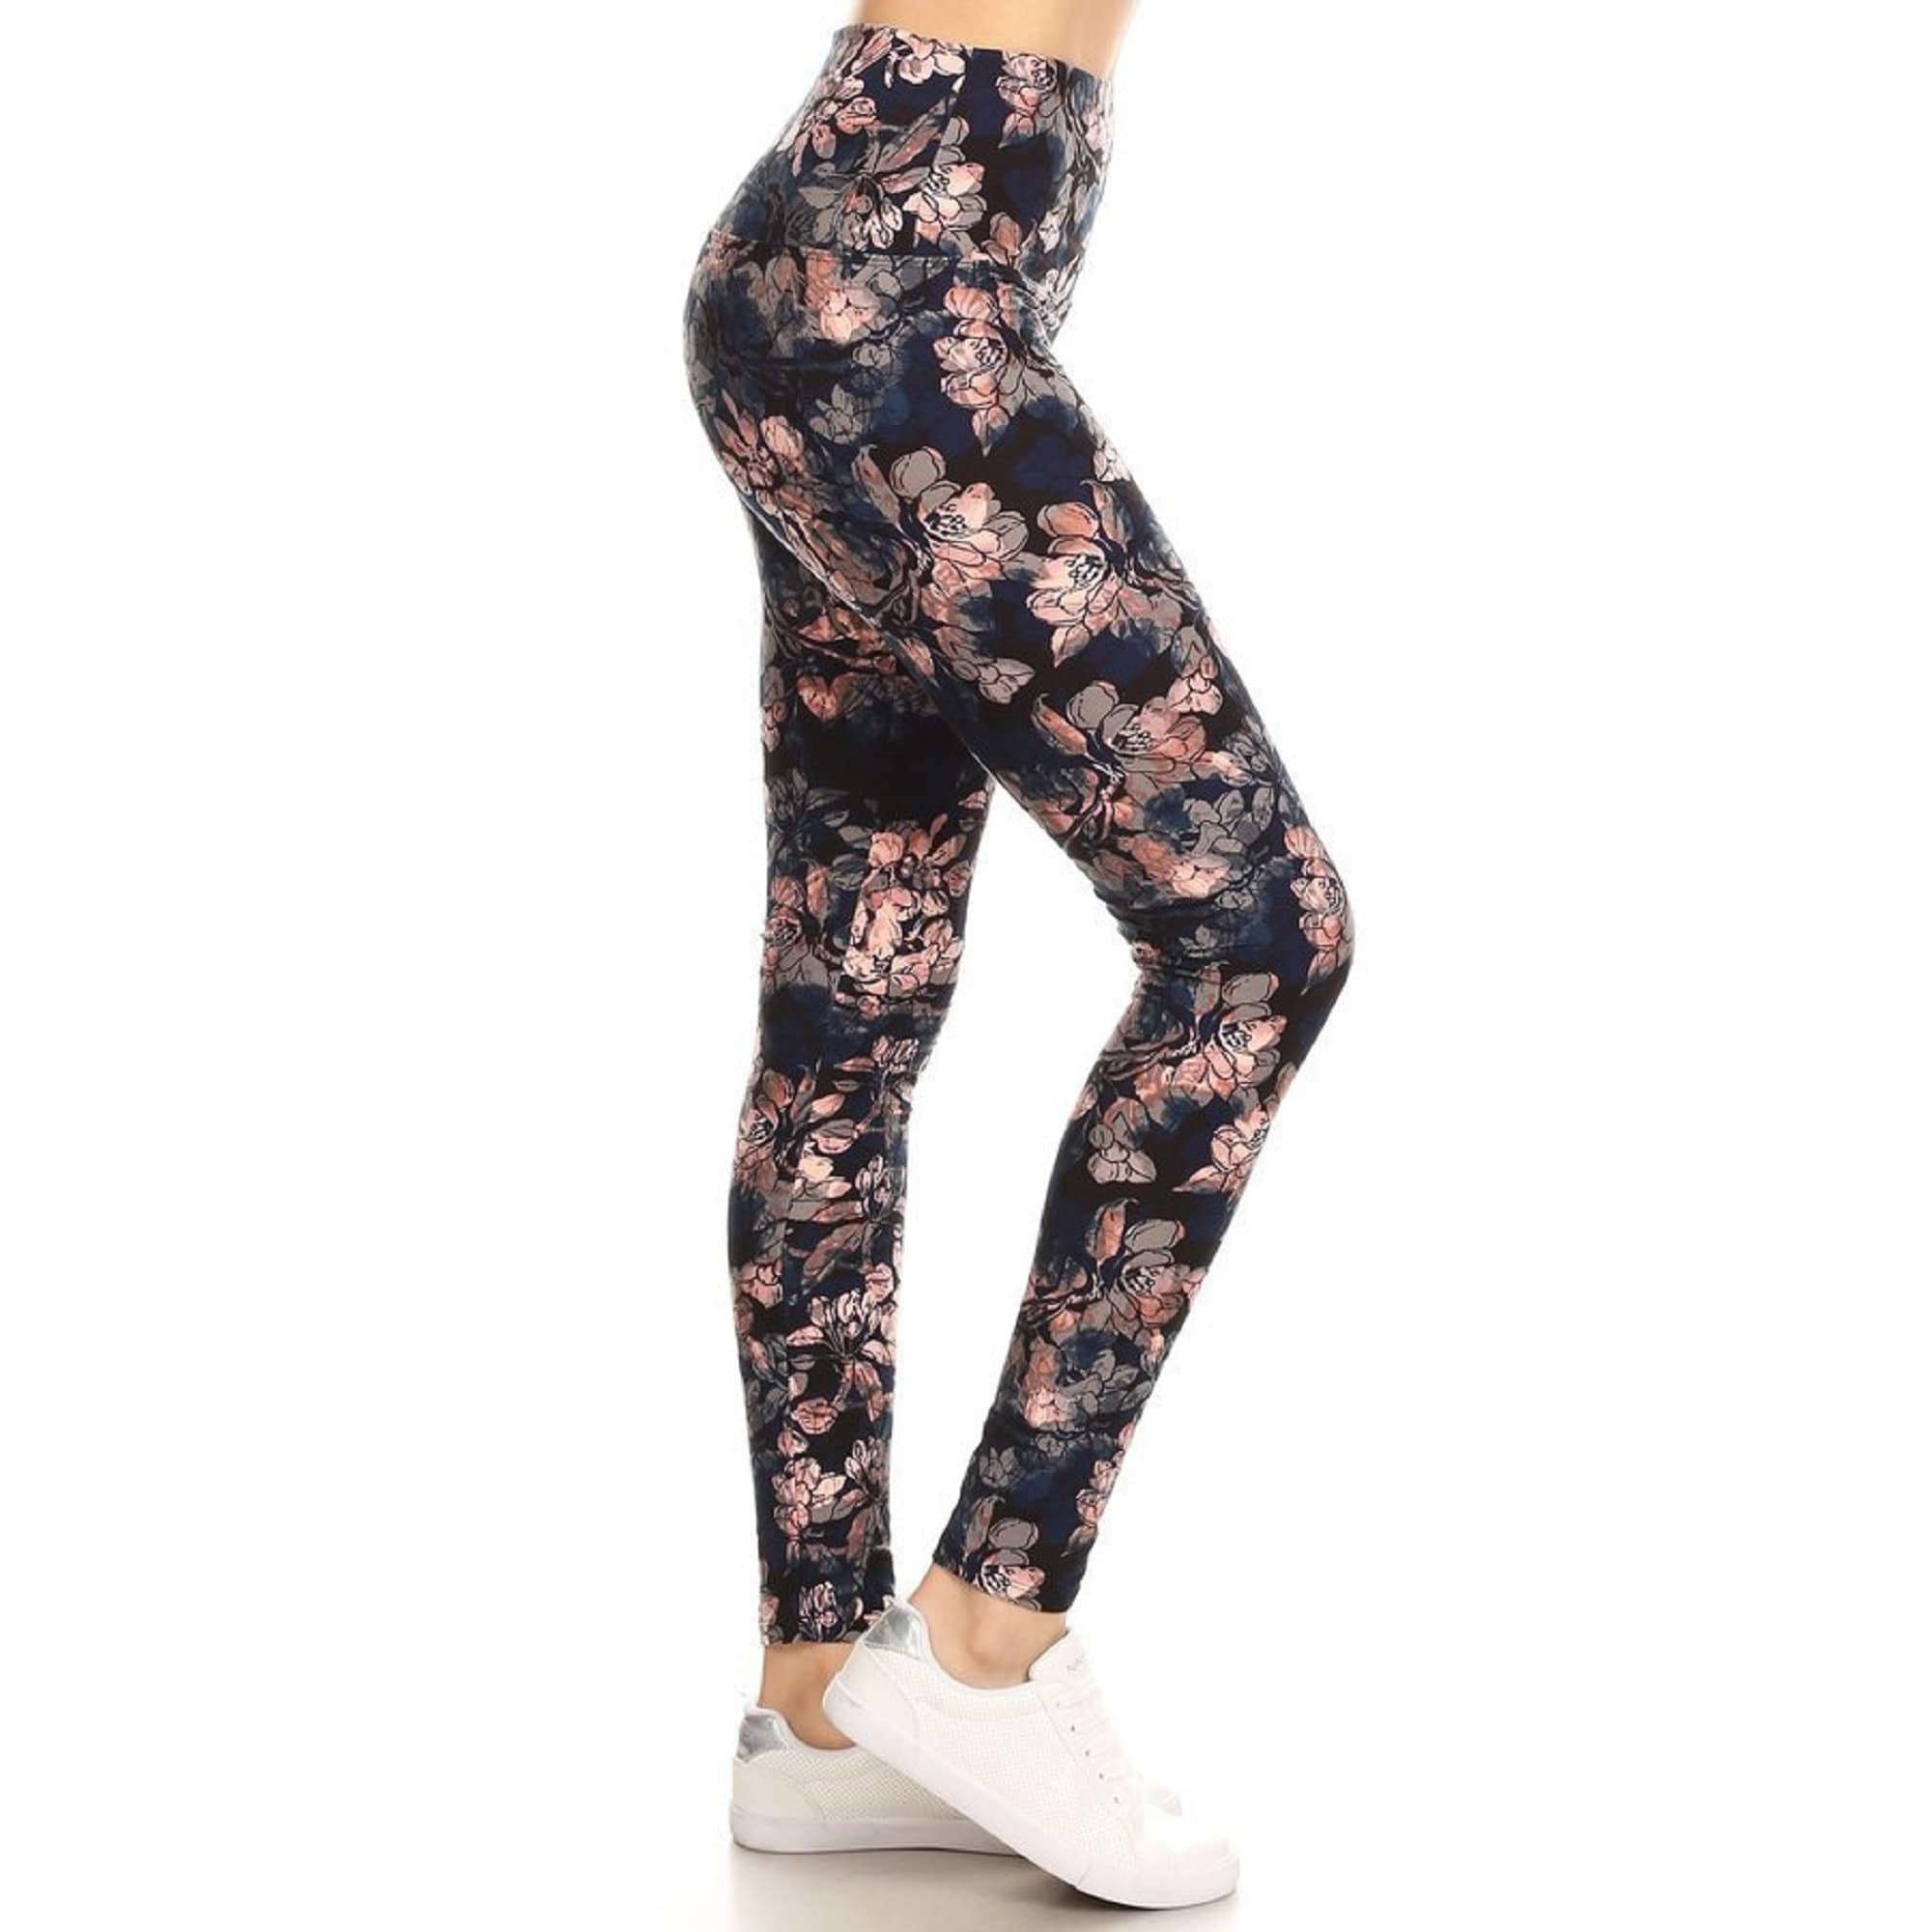 Cherry Blossom Recycled Leggings With Pockets All-over Cherry